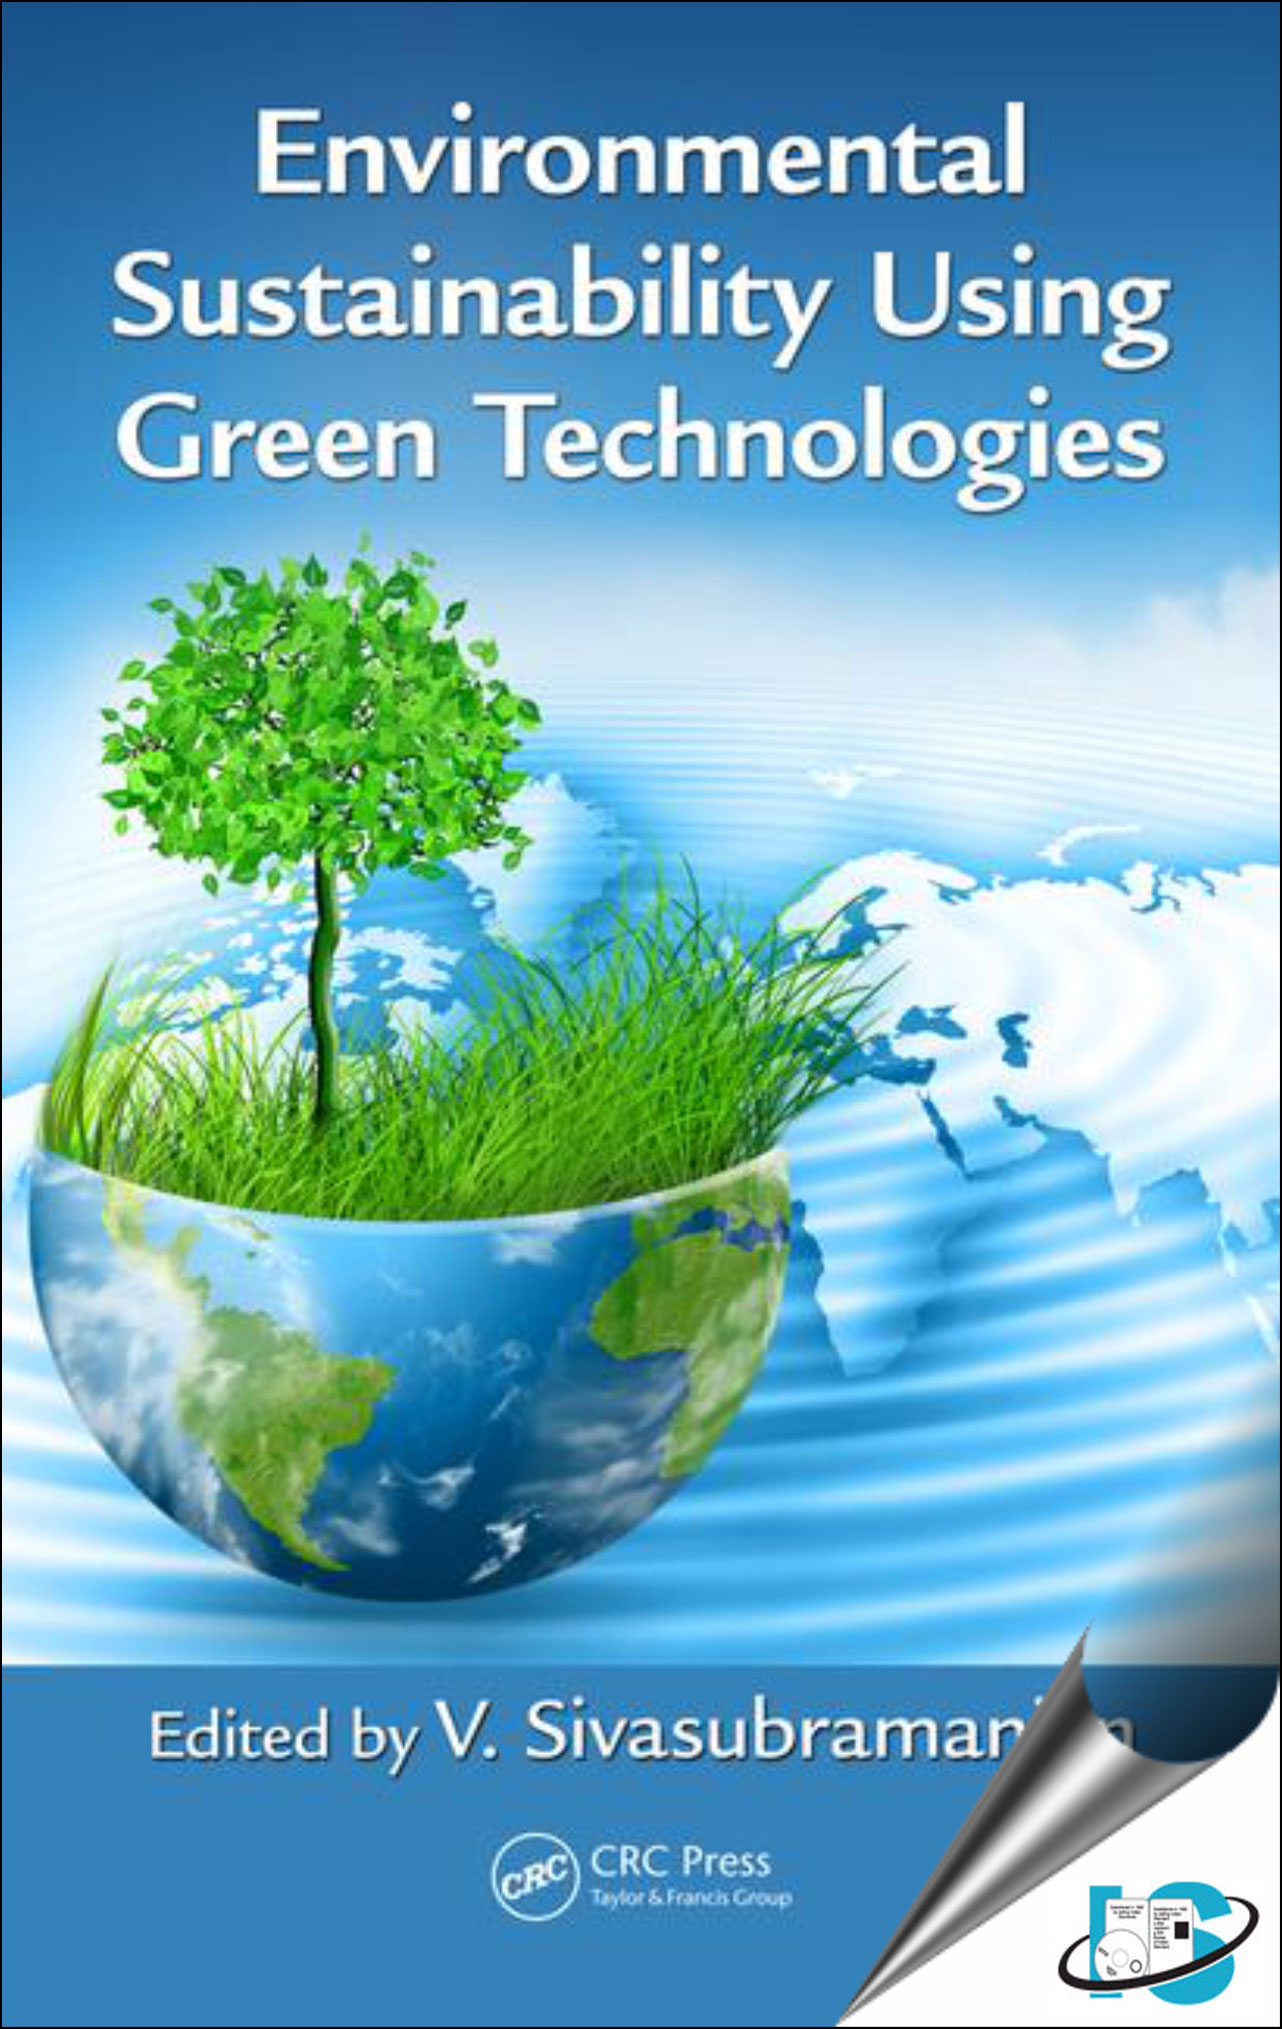 research on environmental sustainability